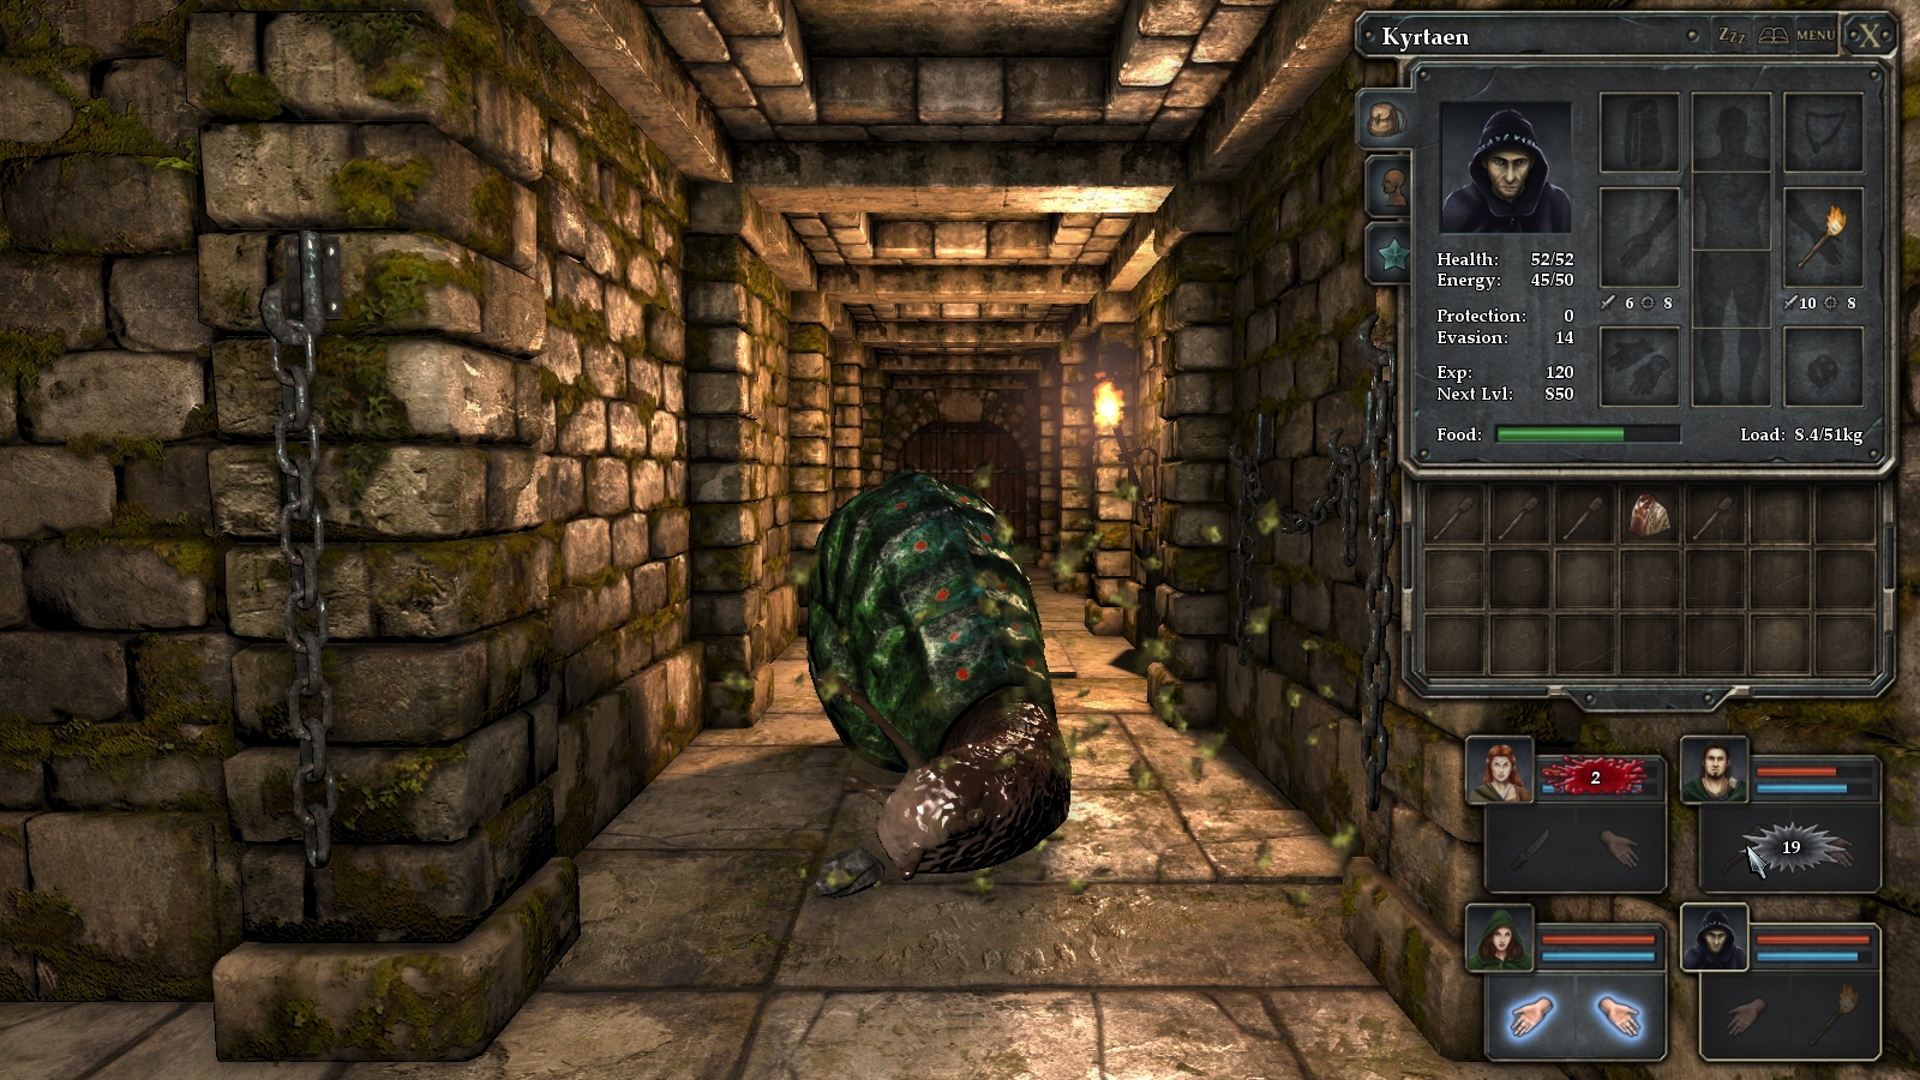 Economic games: four heroes face a giant snail in the first person in the dungeons of Legend of Grimrock